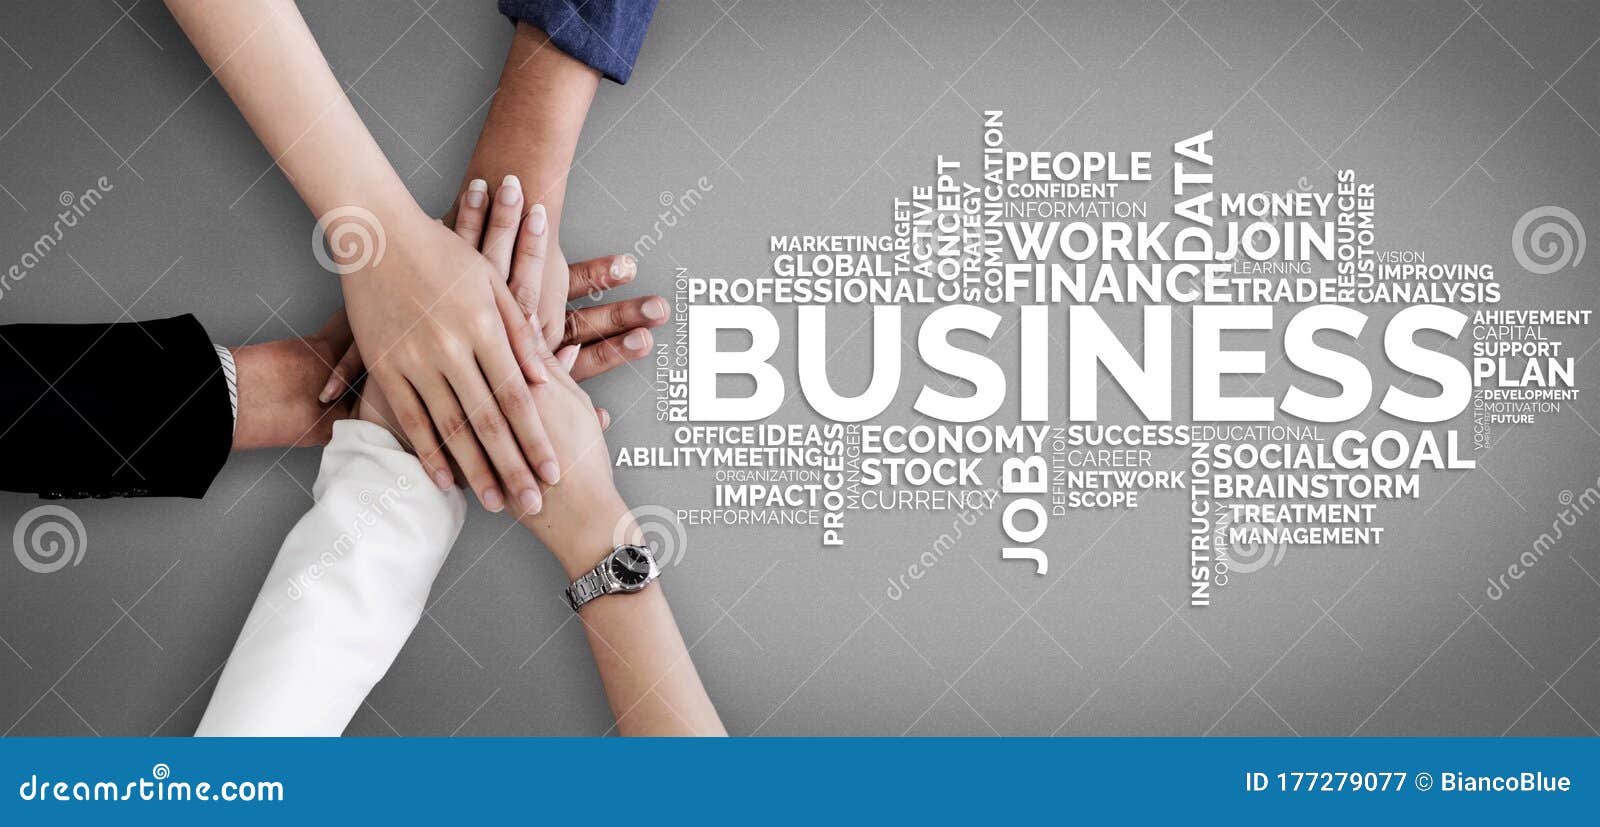 Business Commerce Finance And Marketing Concept Stock Image Image of review, businesspeople